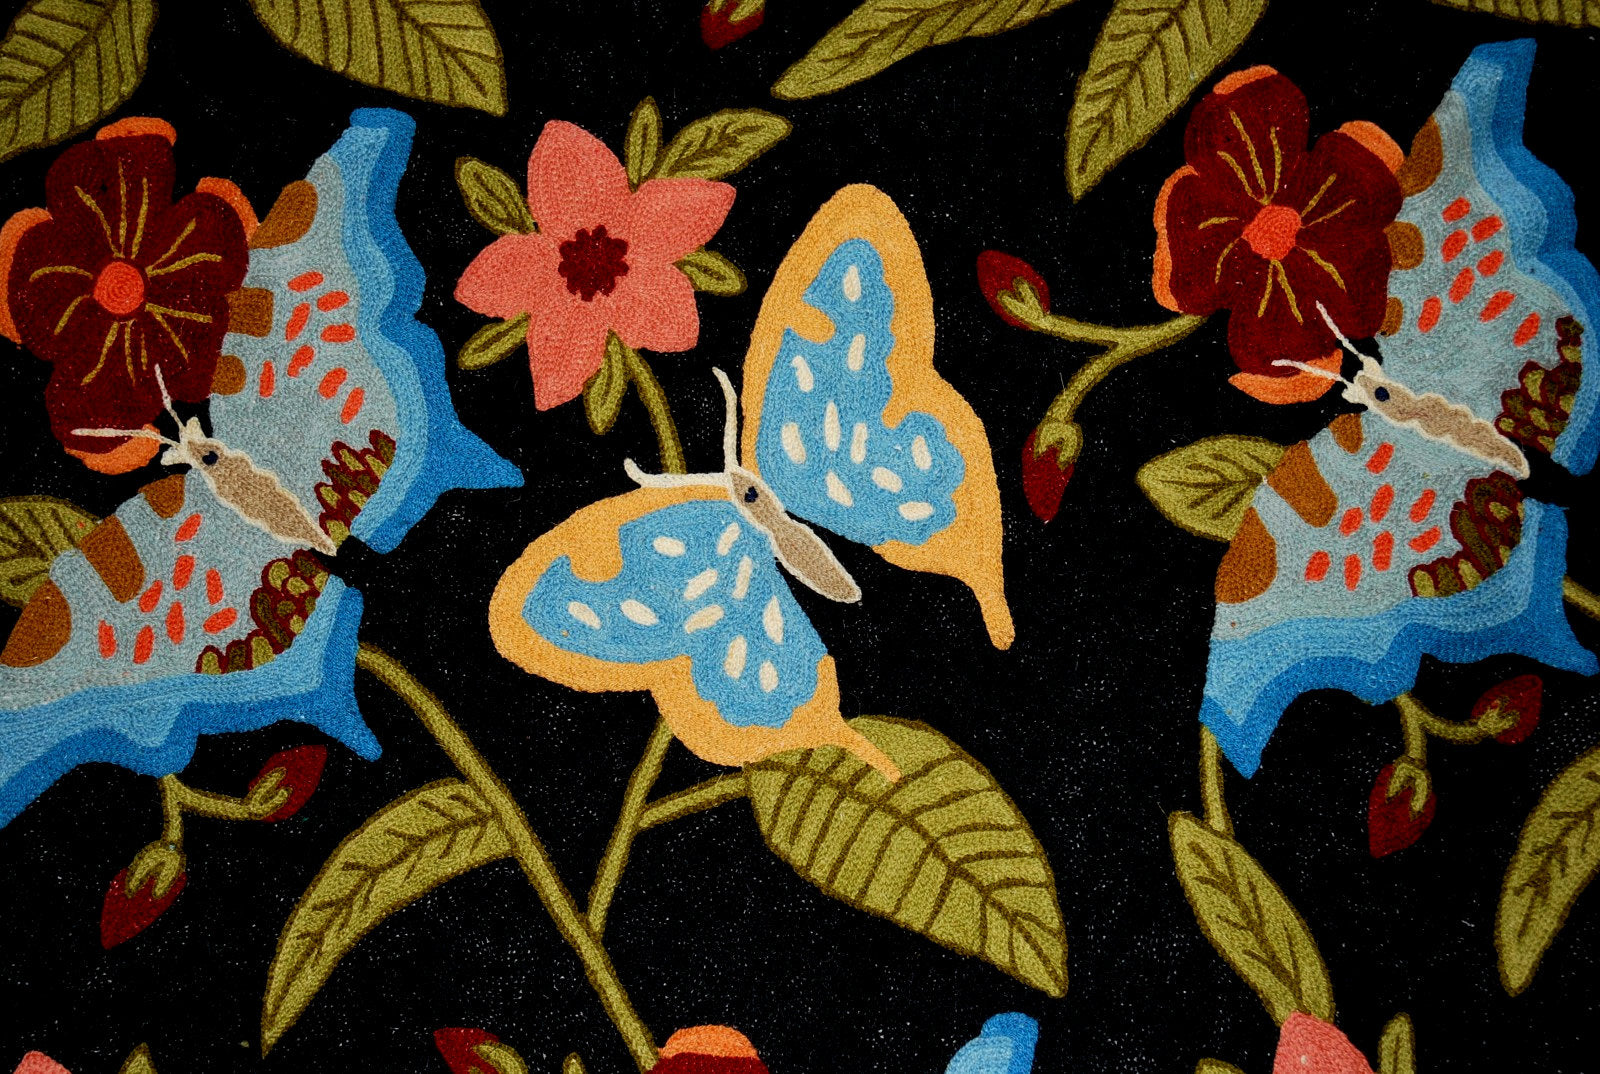 ChainStitch Tapestry Area Rug "Butterflies", Multicolor Wool Embroidery 3x5 feet #CWR15118